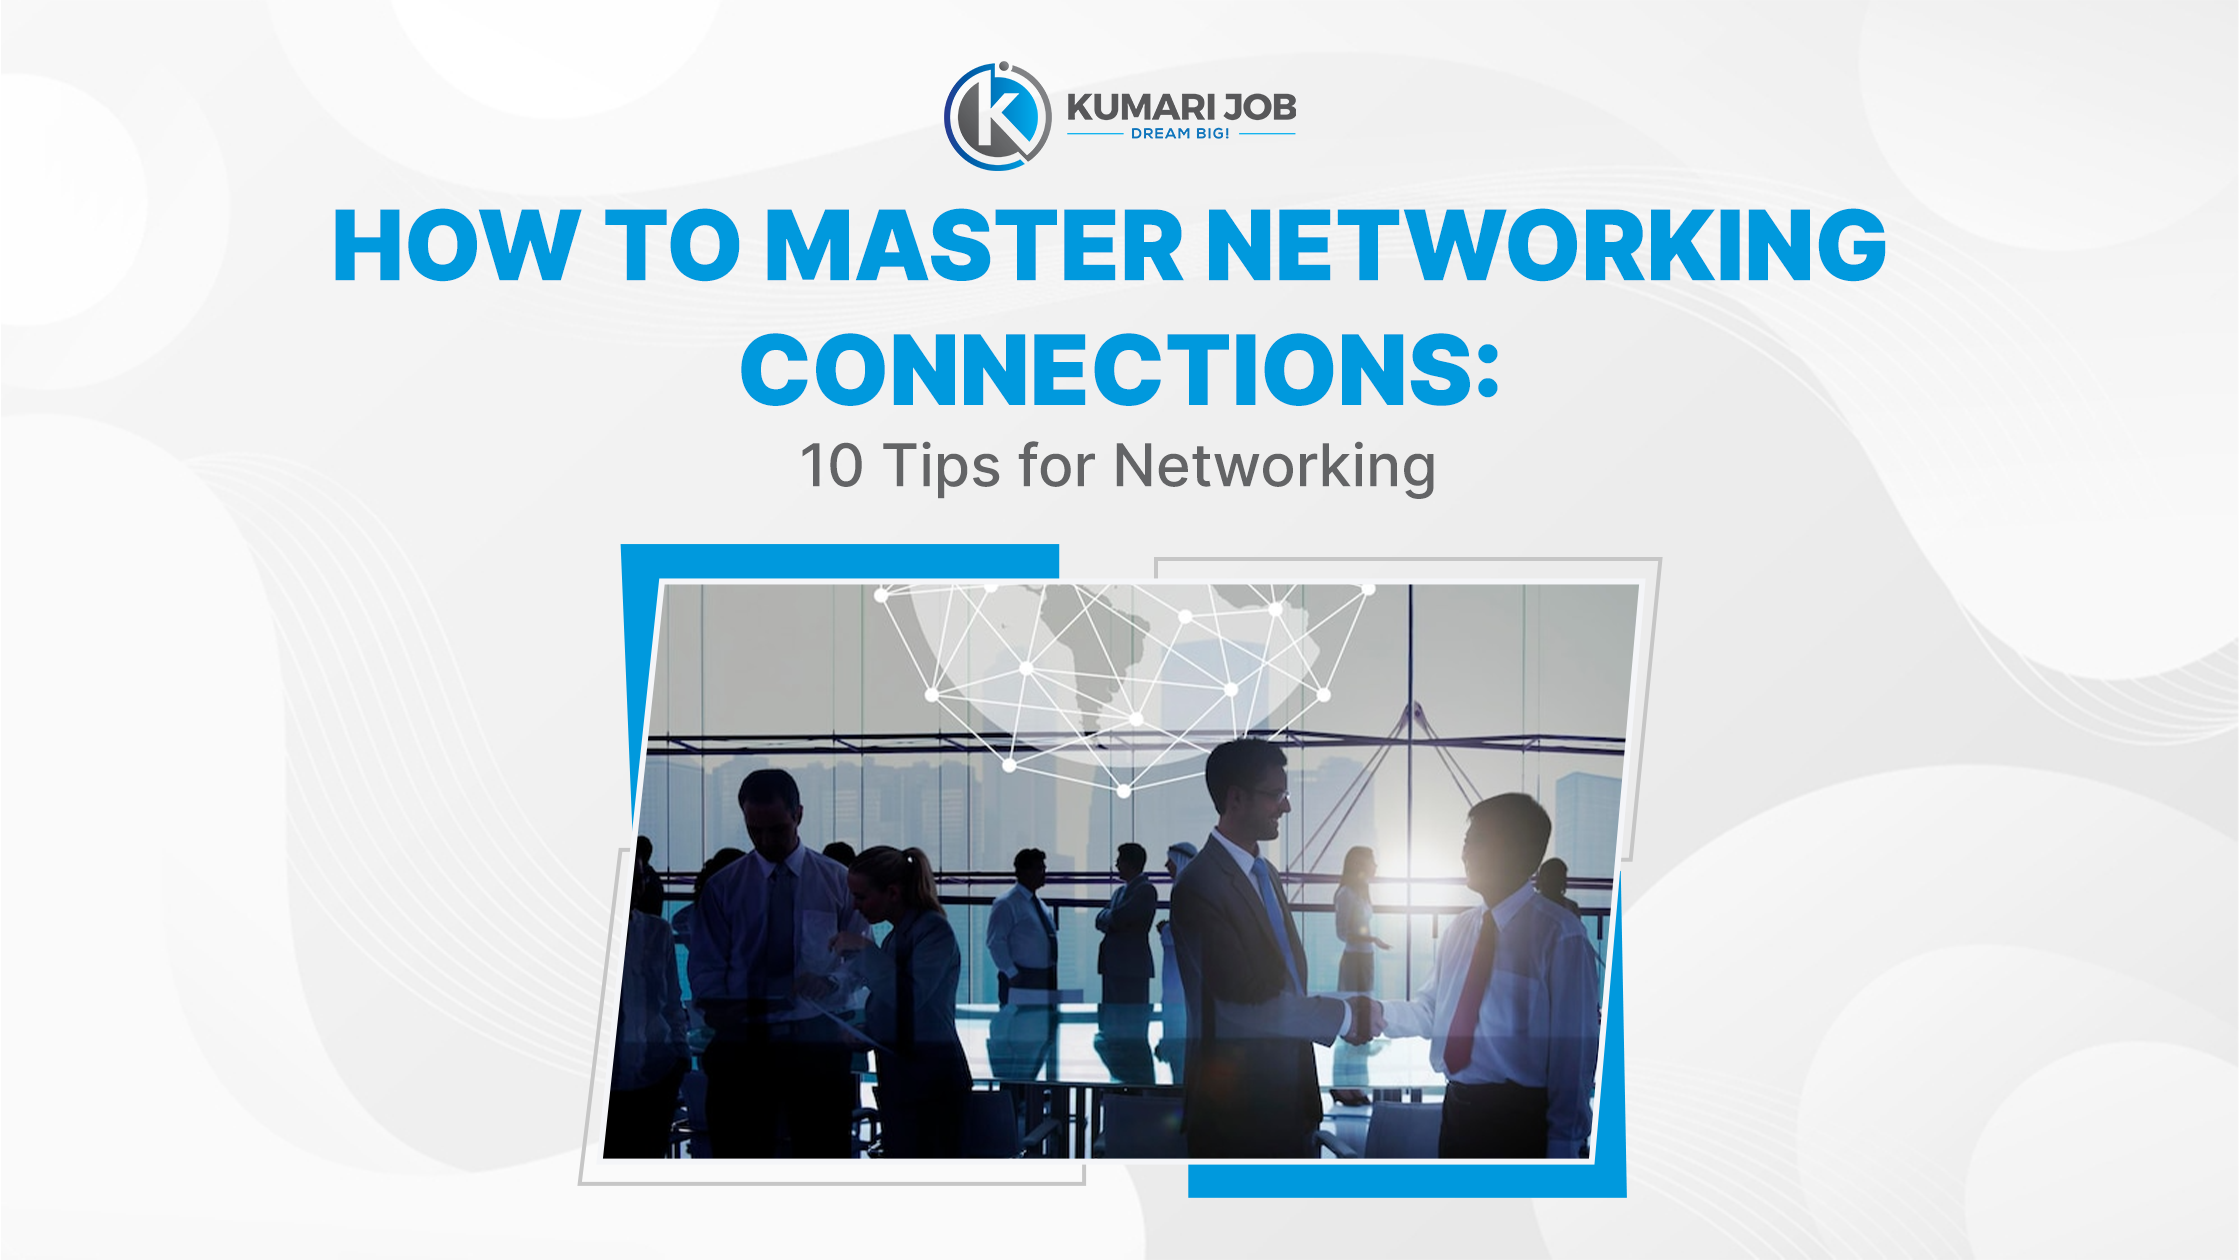 network strategy